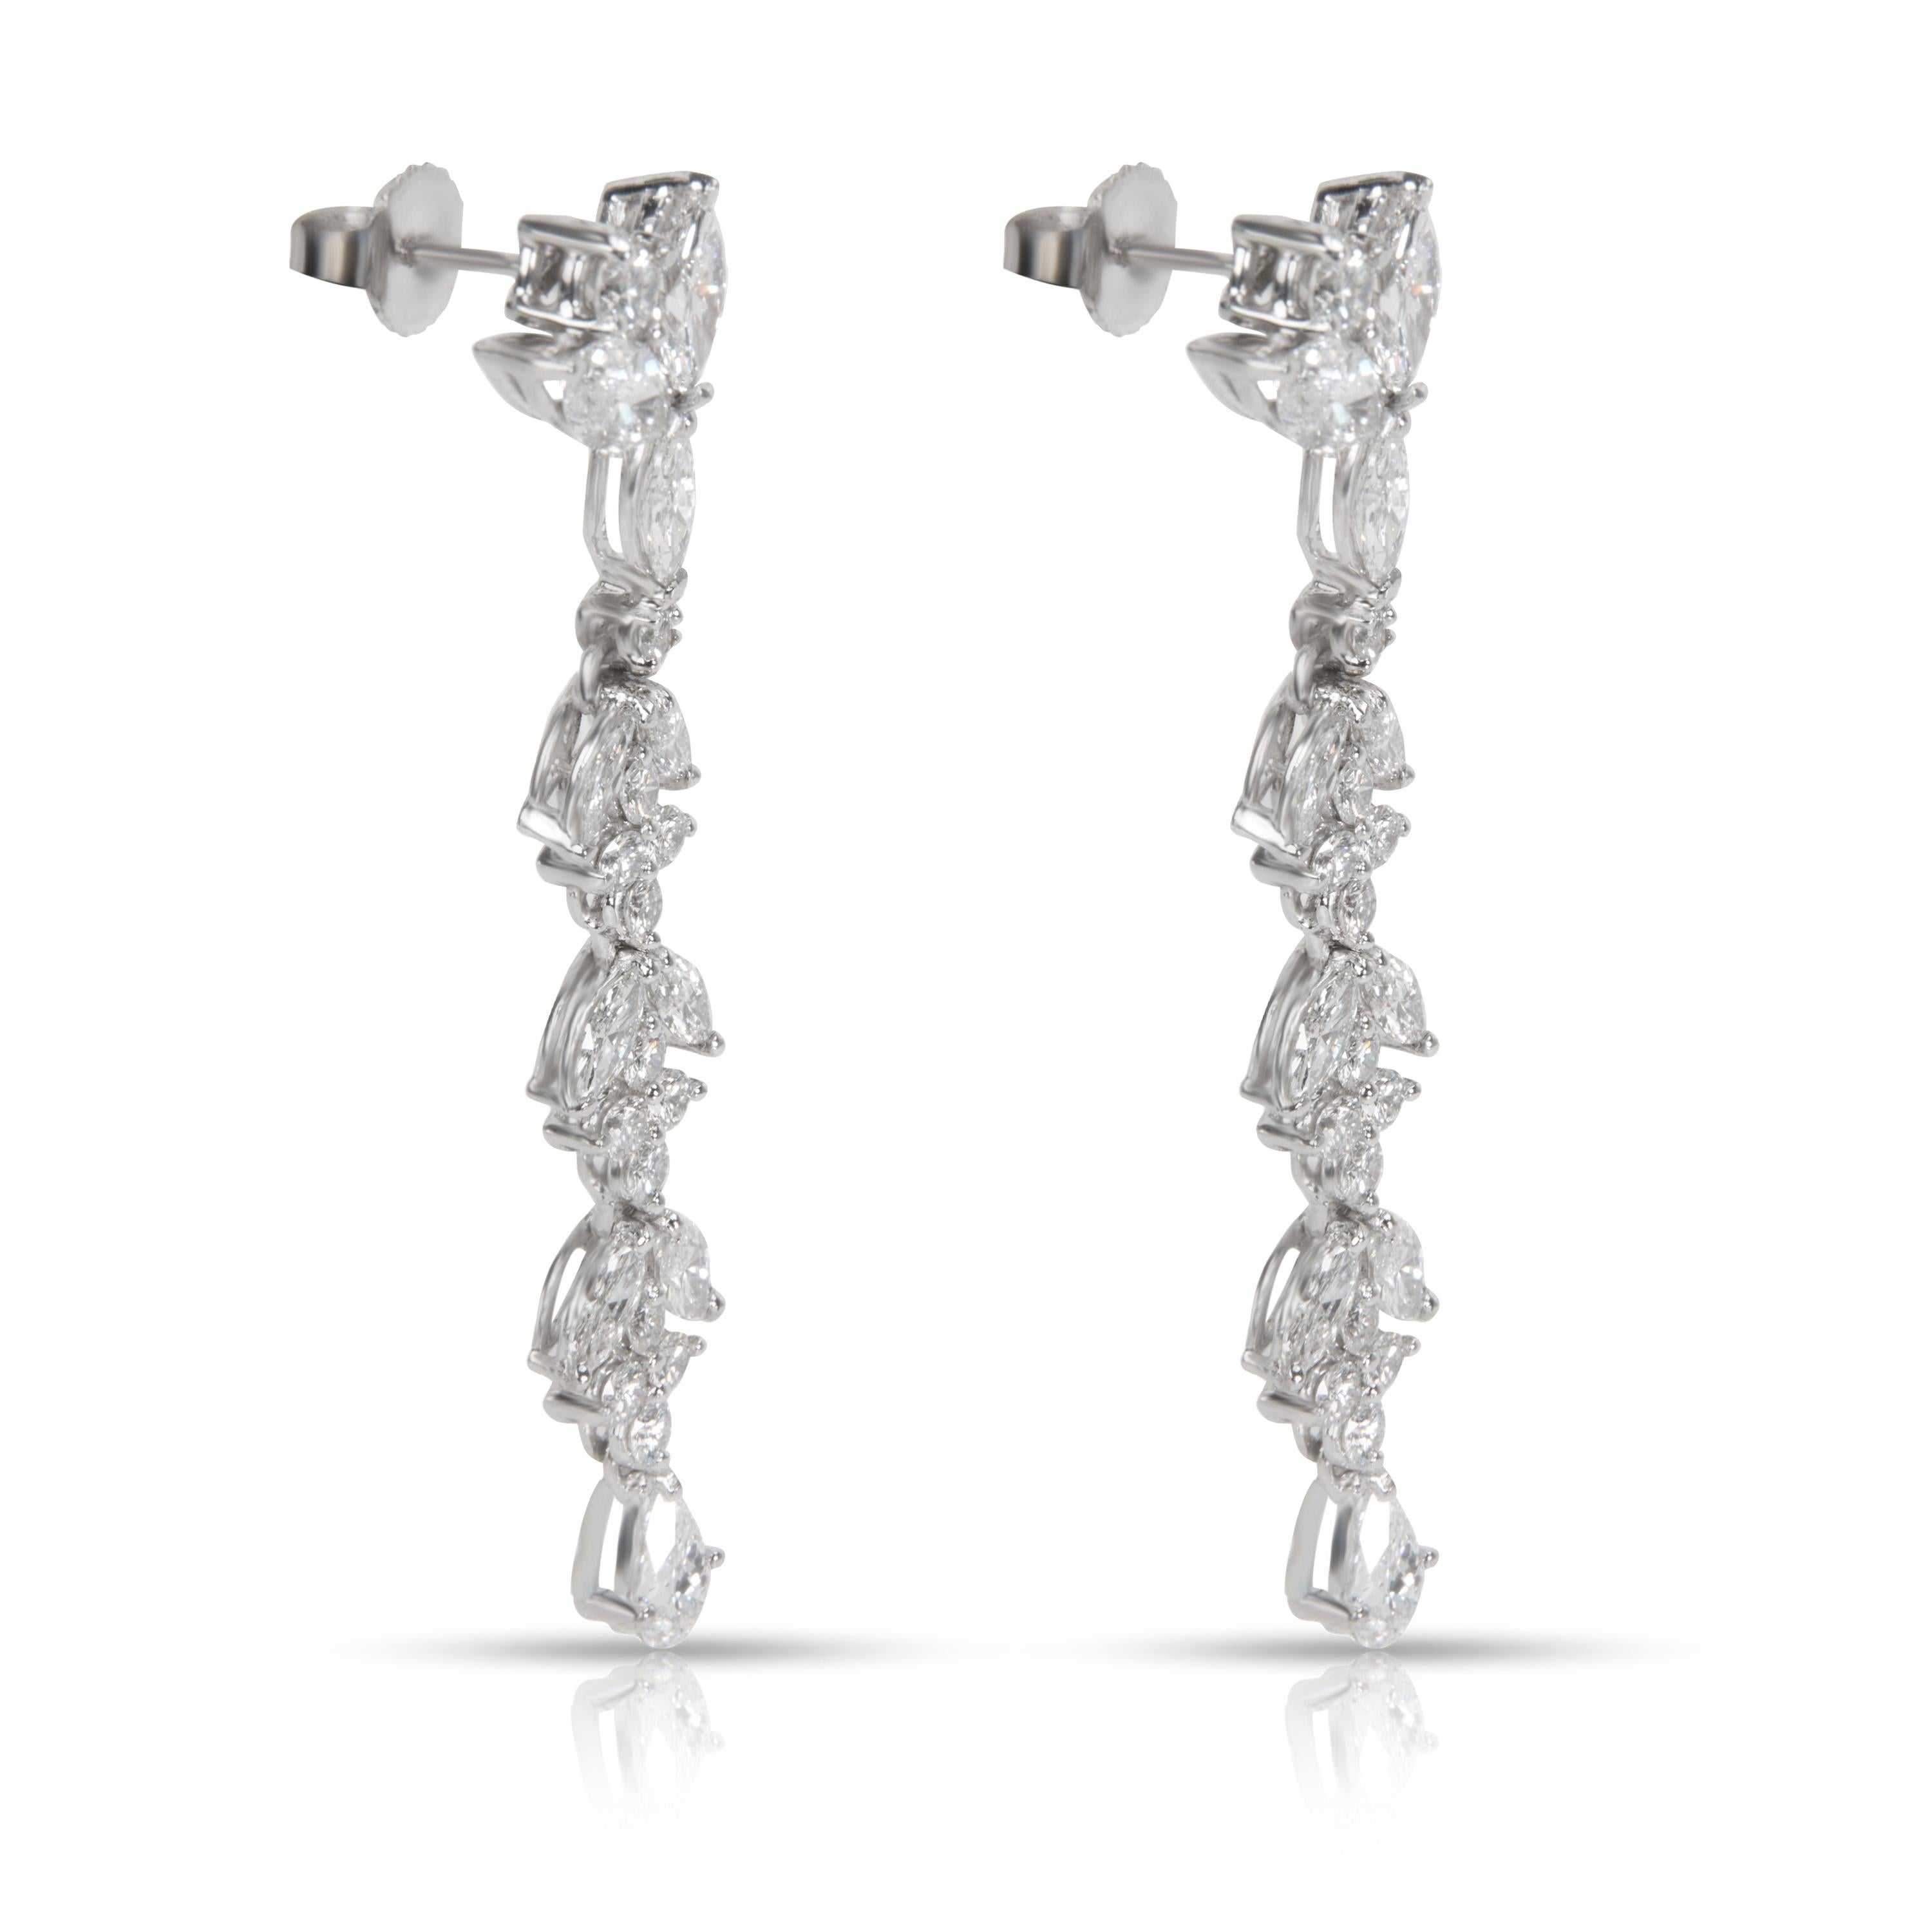 Marquise, Pear & Round Diamond Drop Earrings in Platinum (4.64 CTW)

PRIMARY DETAILS
SKU: 101029
Listing Title: Marquise, Pear & Round Diamond Drop Earrings in Platinum (4.64 CTW)
Condition Description: Retail price 14,500 USD. In excellent